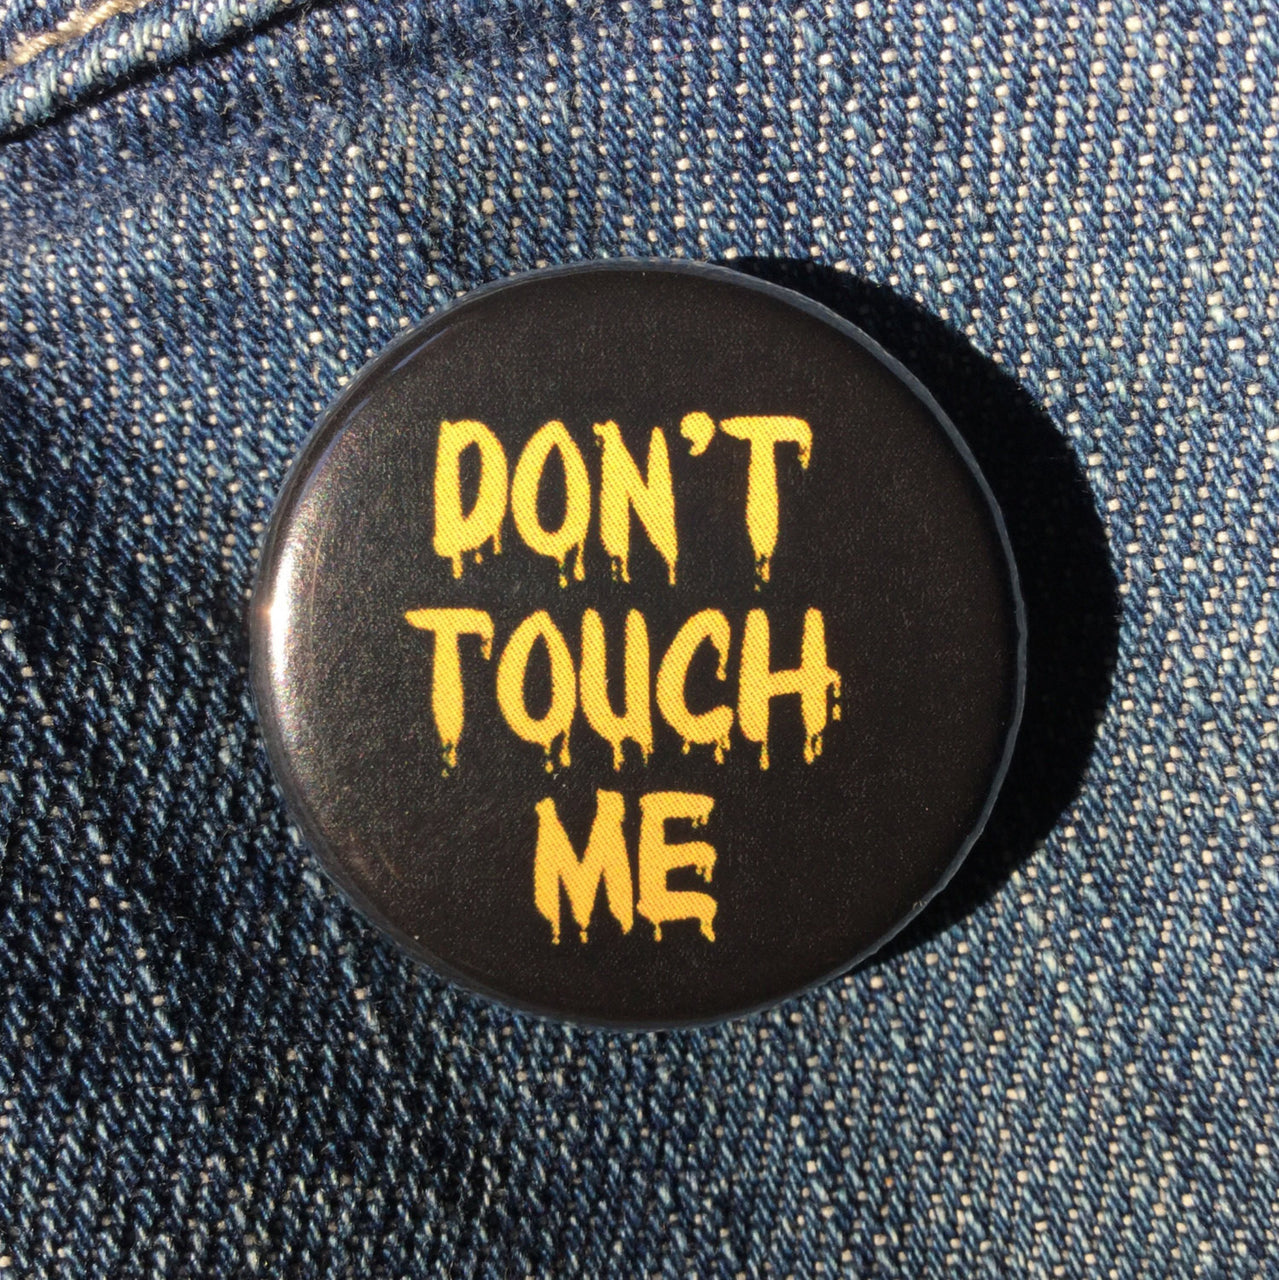 Don't touch me button / Consent button - Radical Buttons